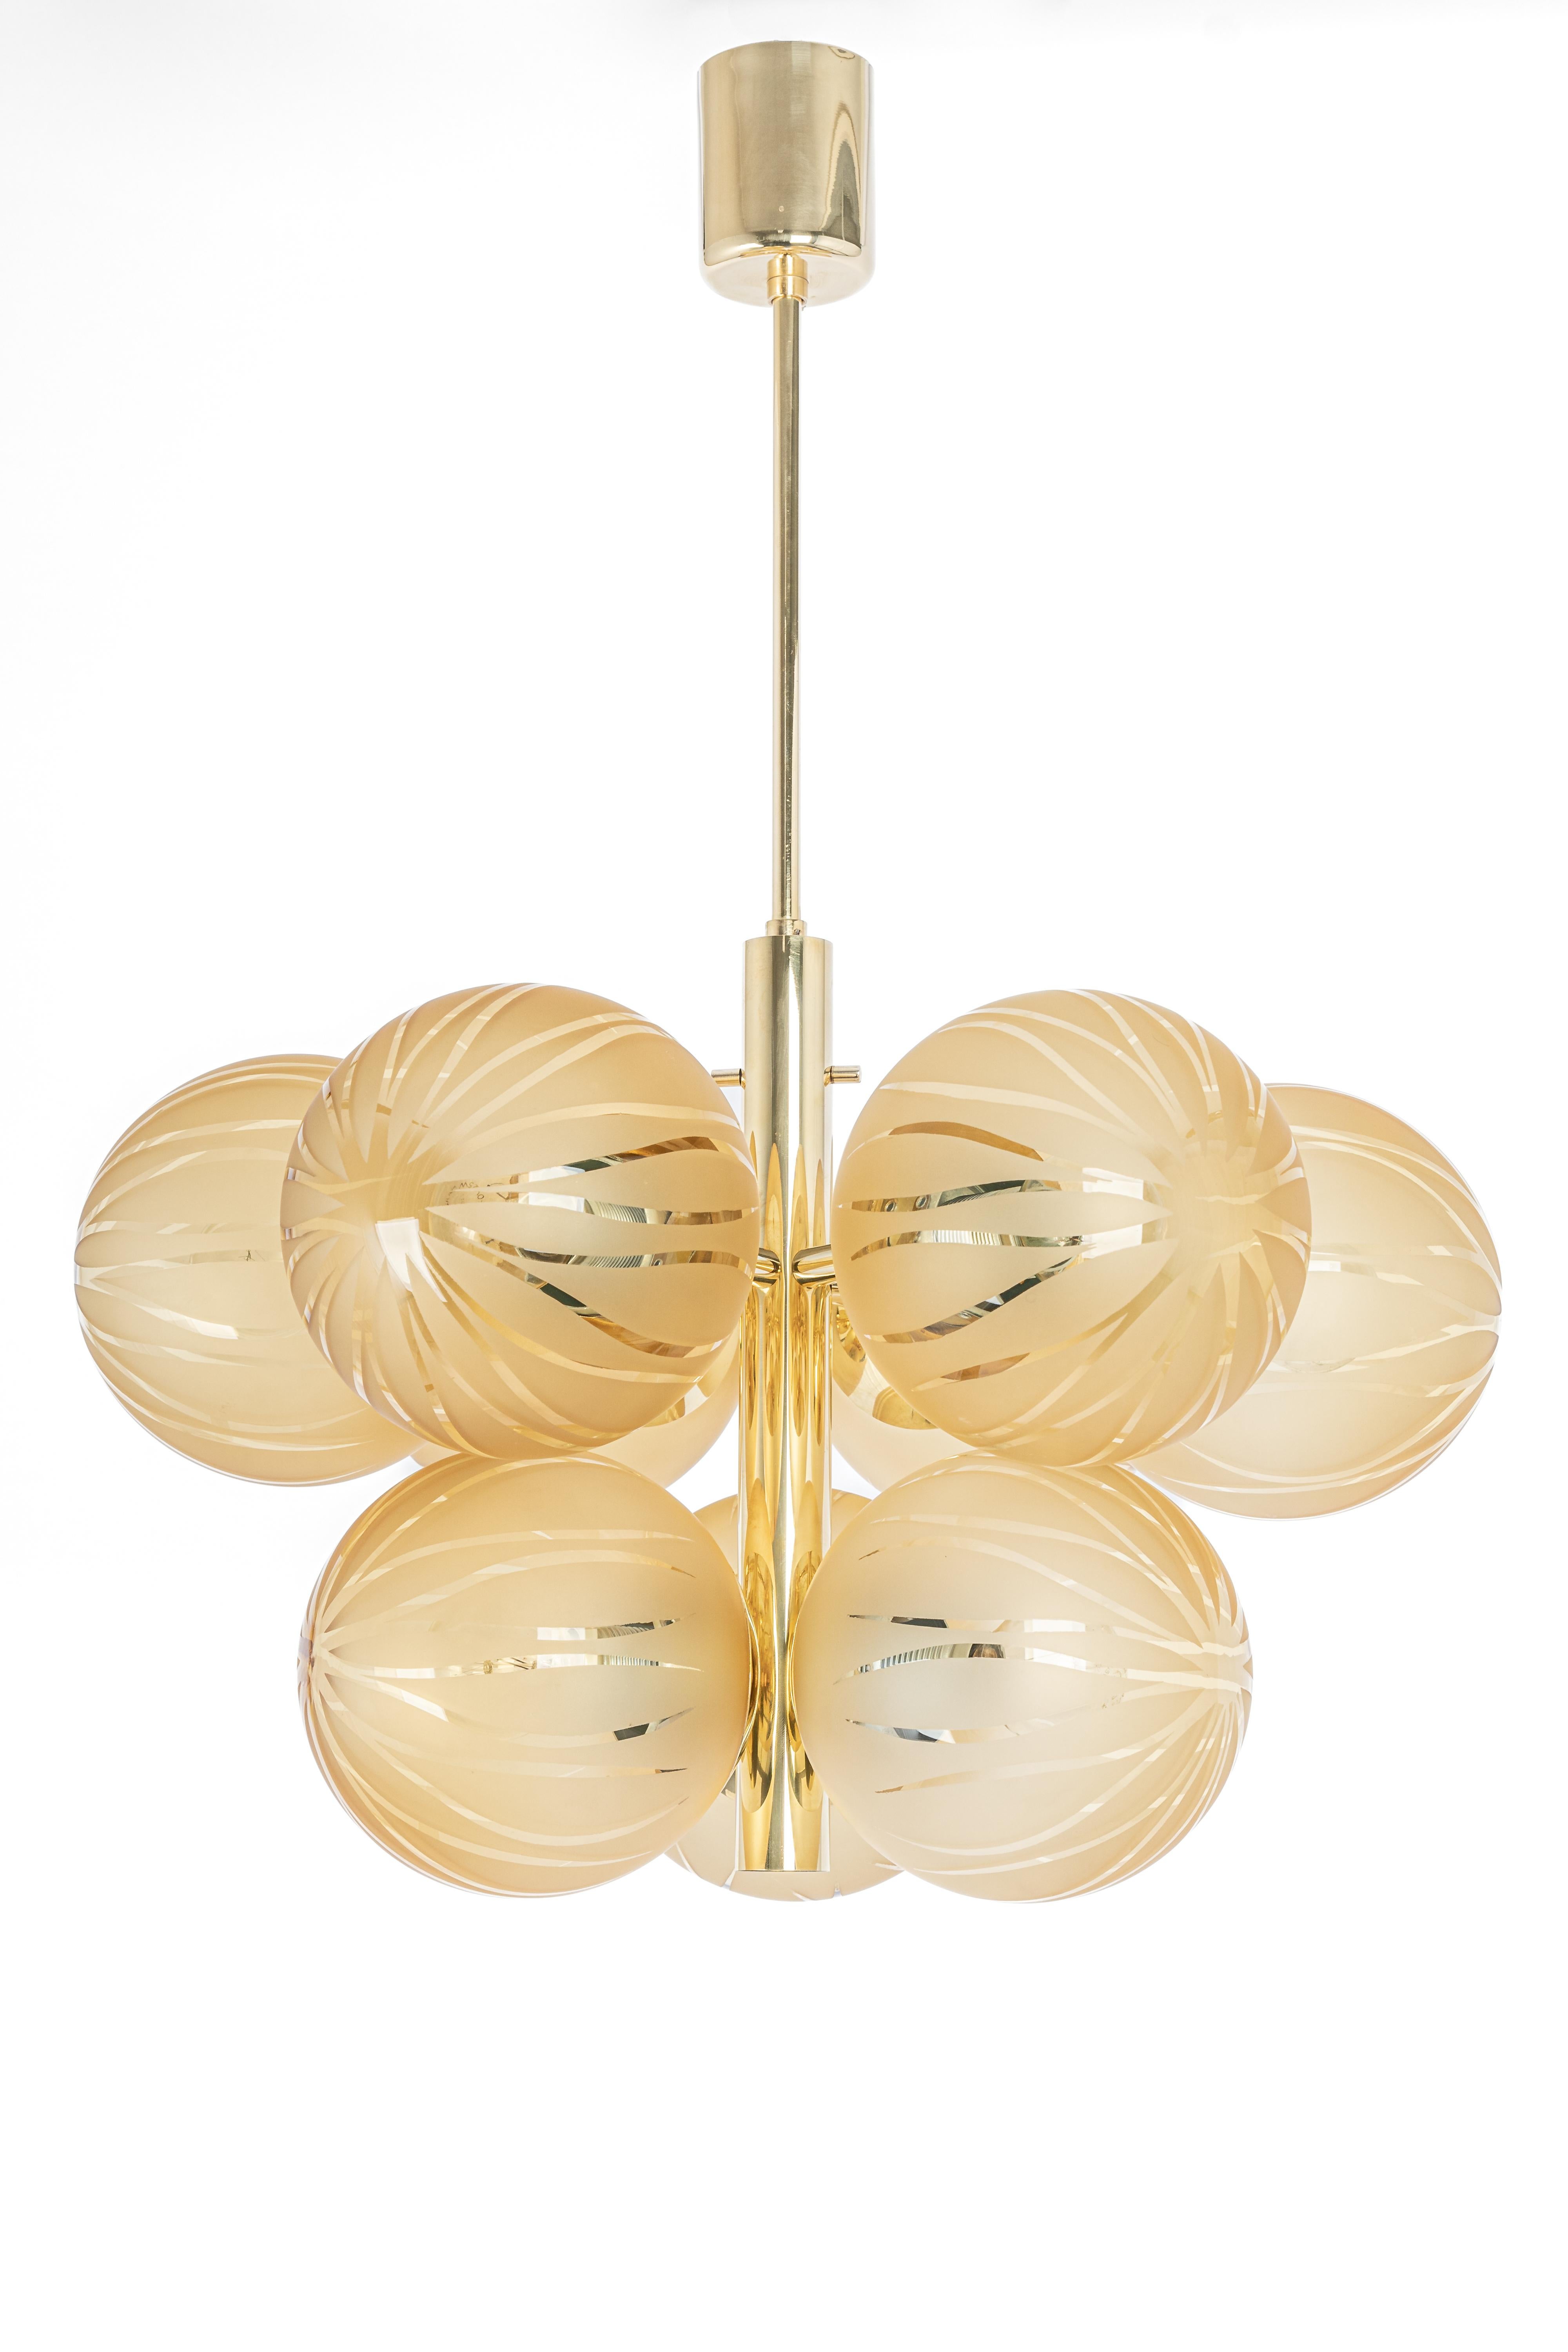 Late 20th Century Large Stunning Kaiser Sputnik Opal Glass Globes Chandelier, Germany, 1970s For Sale